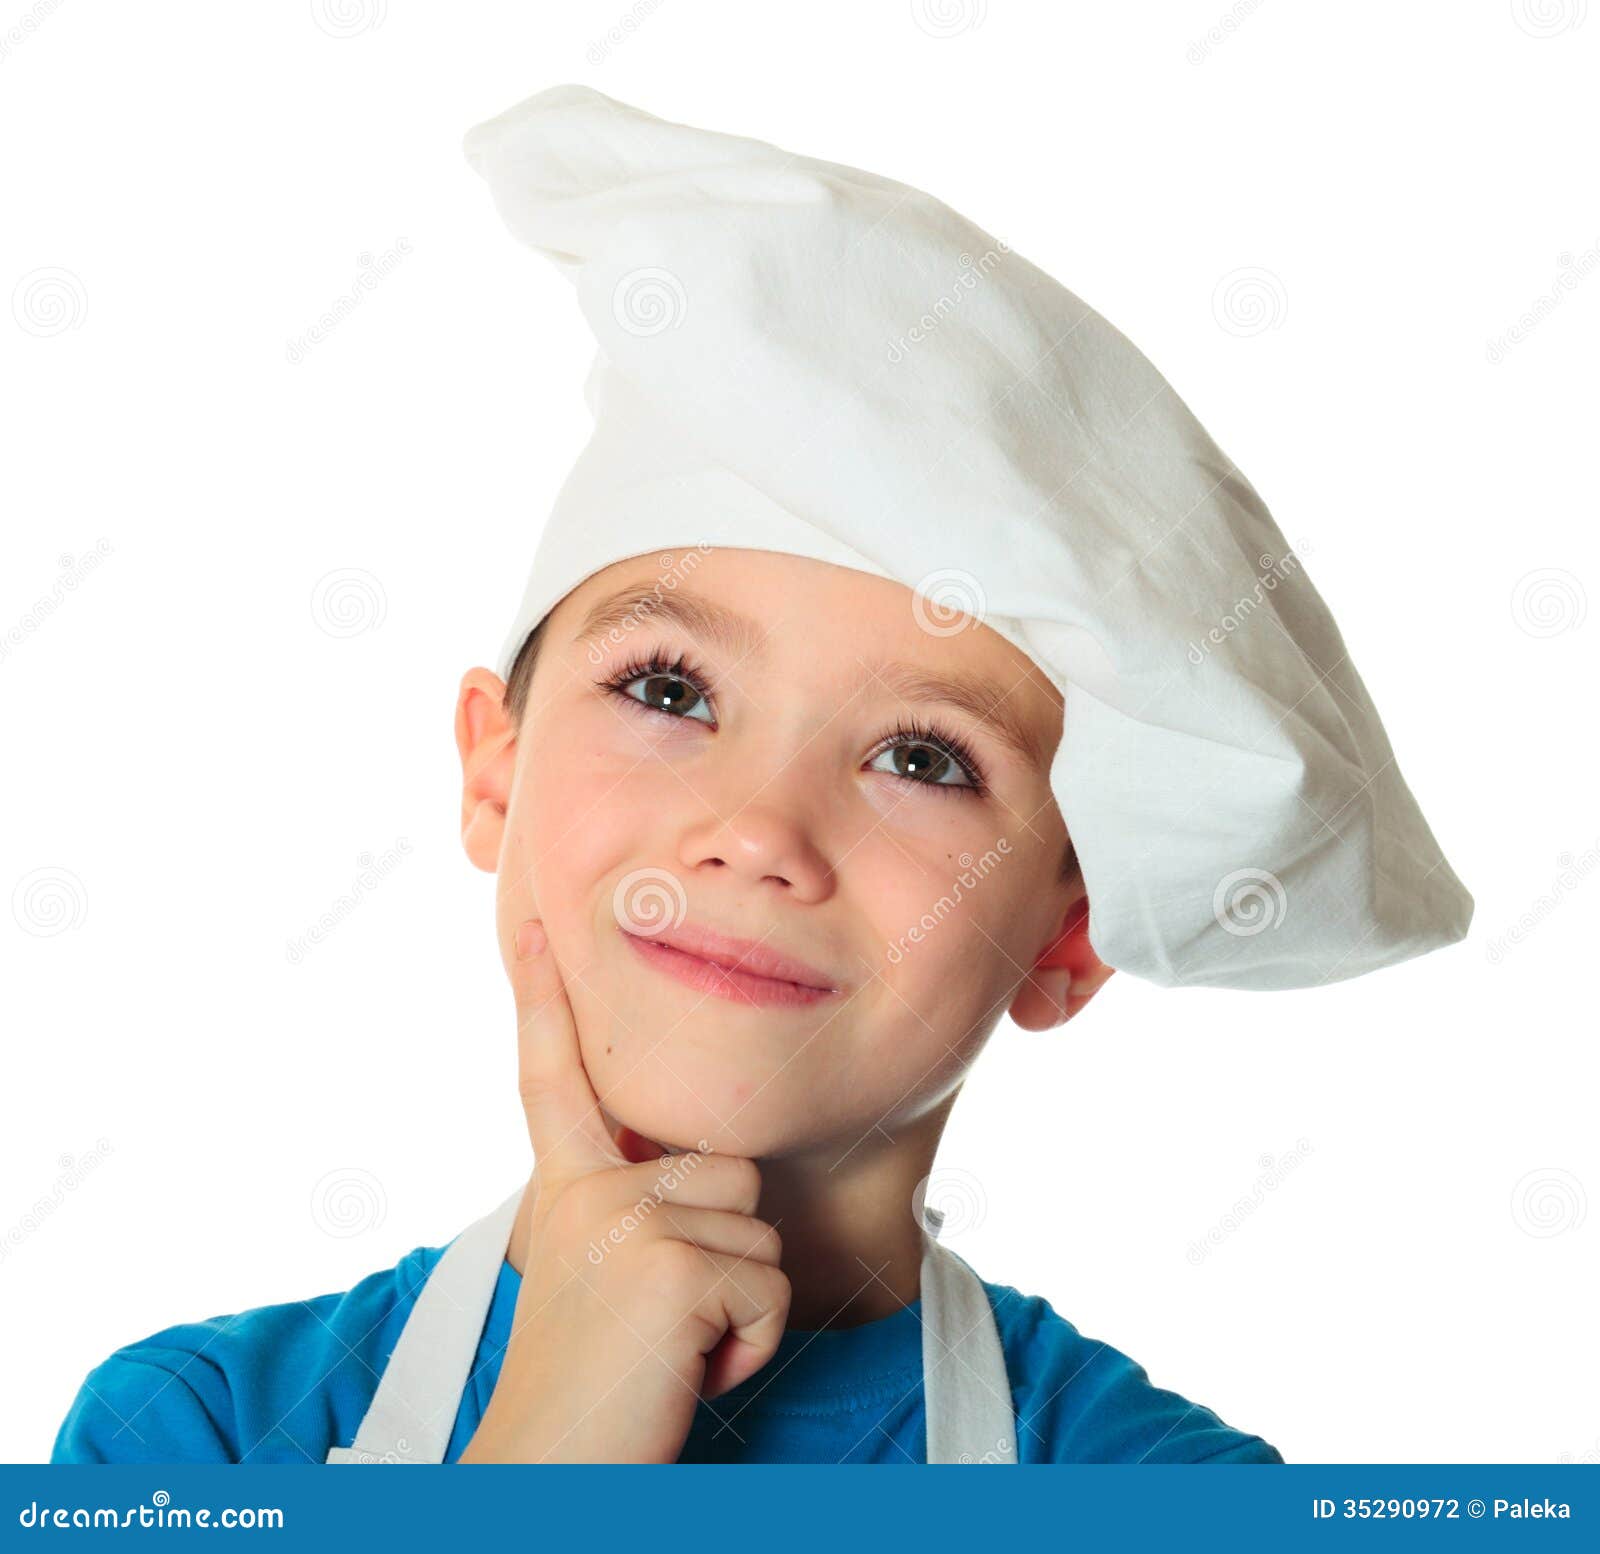 Cook boy stock photo. Image of preparation, education - 35290972